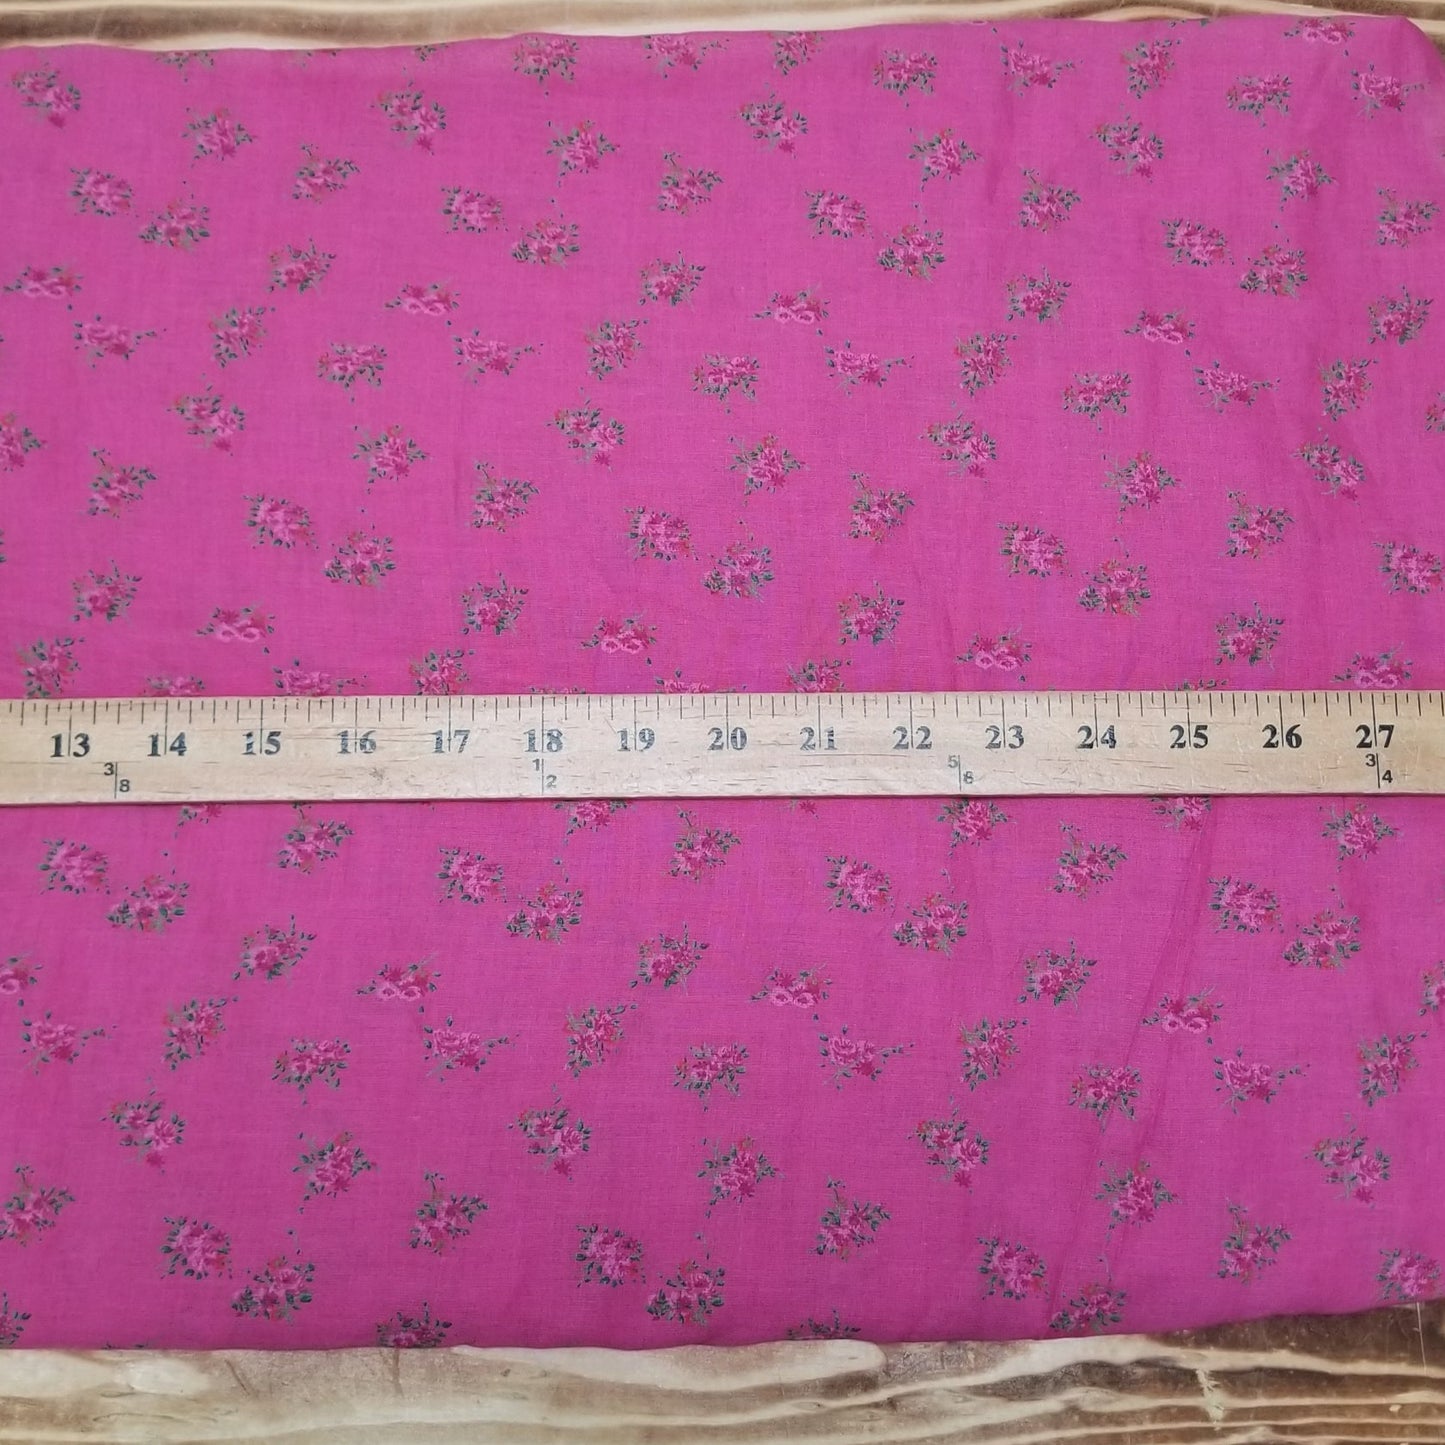 Designer Deadstock Sheer Cottage Floral Fuchsia Cotton Lawn Woven-Sold by the yard